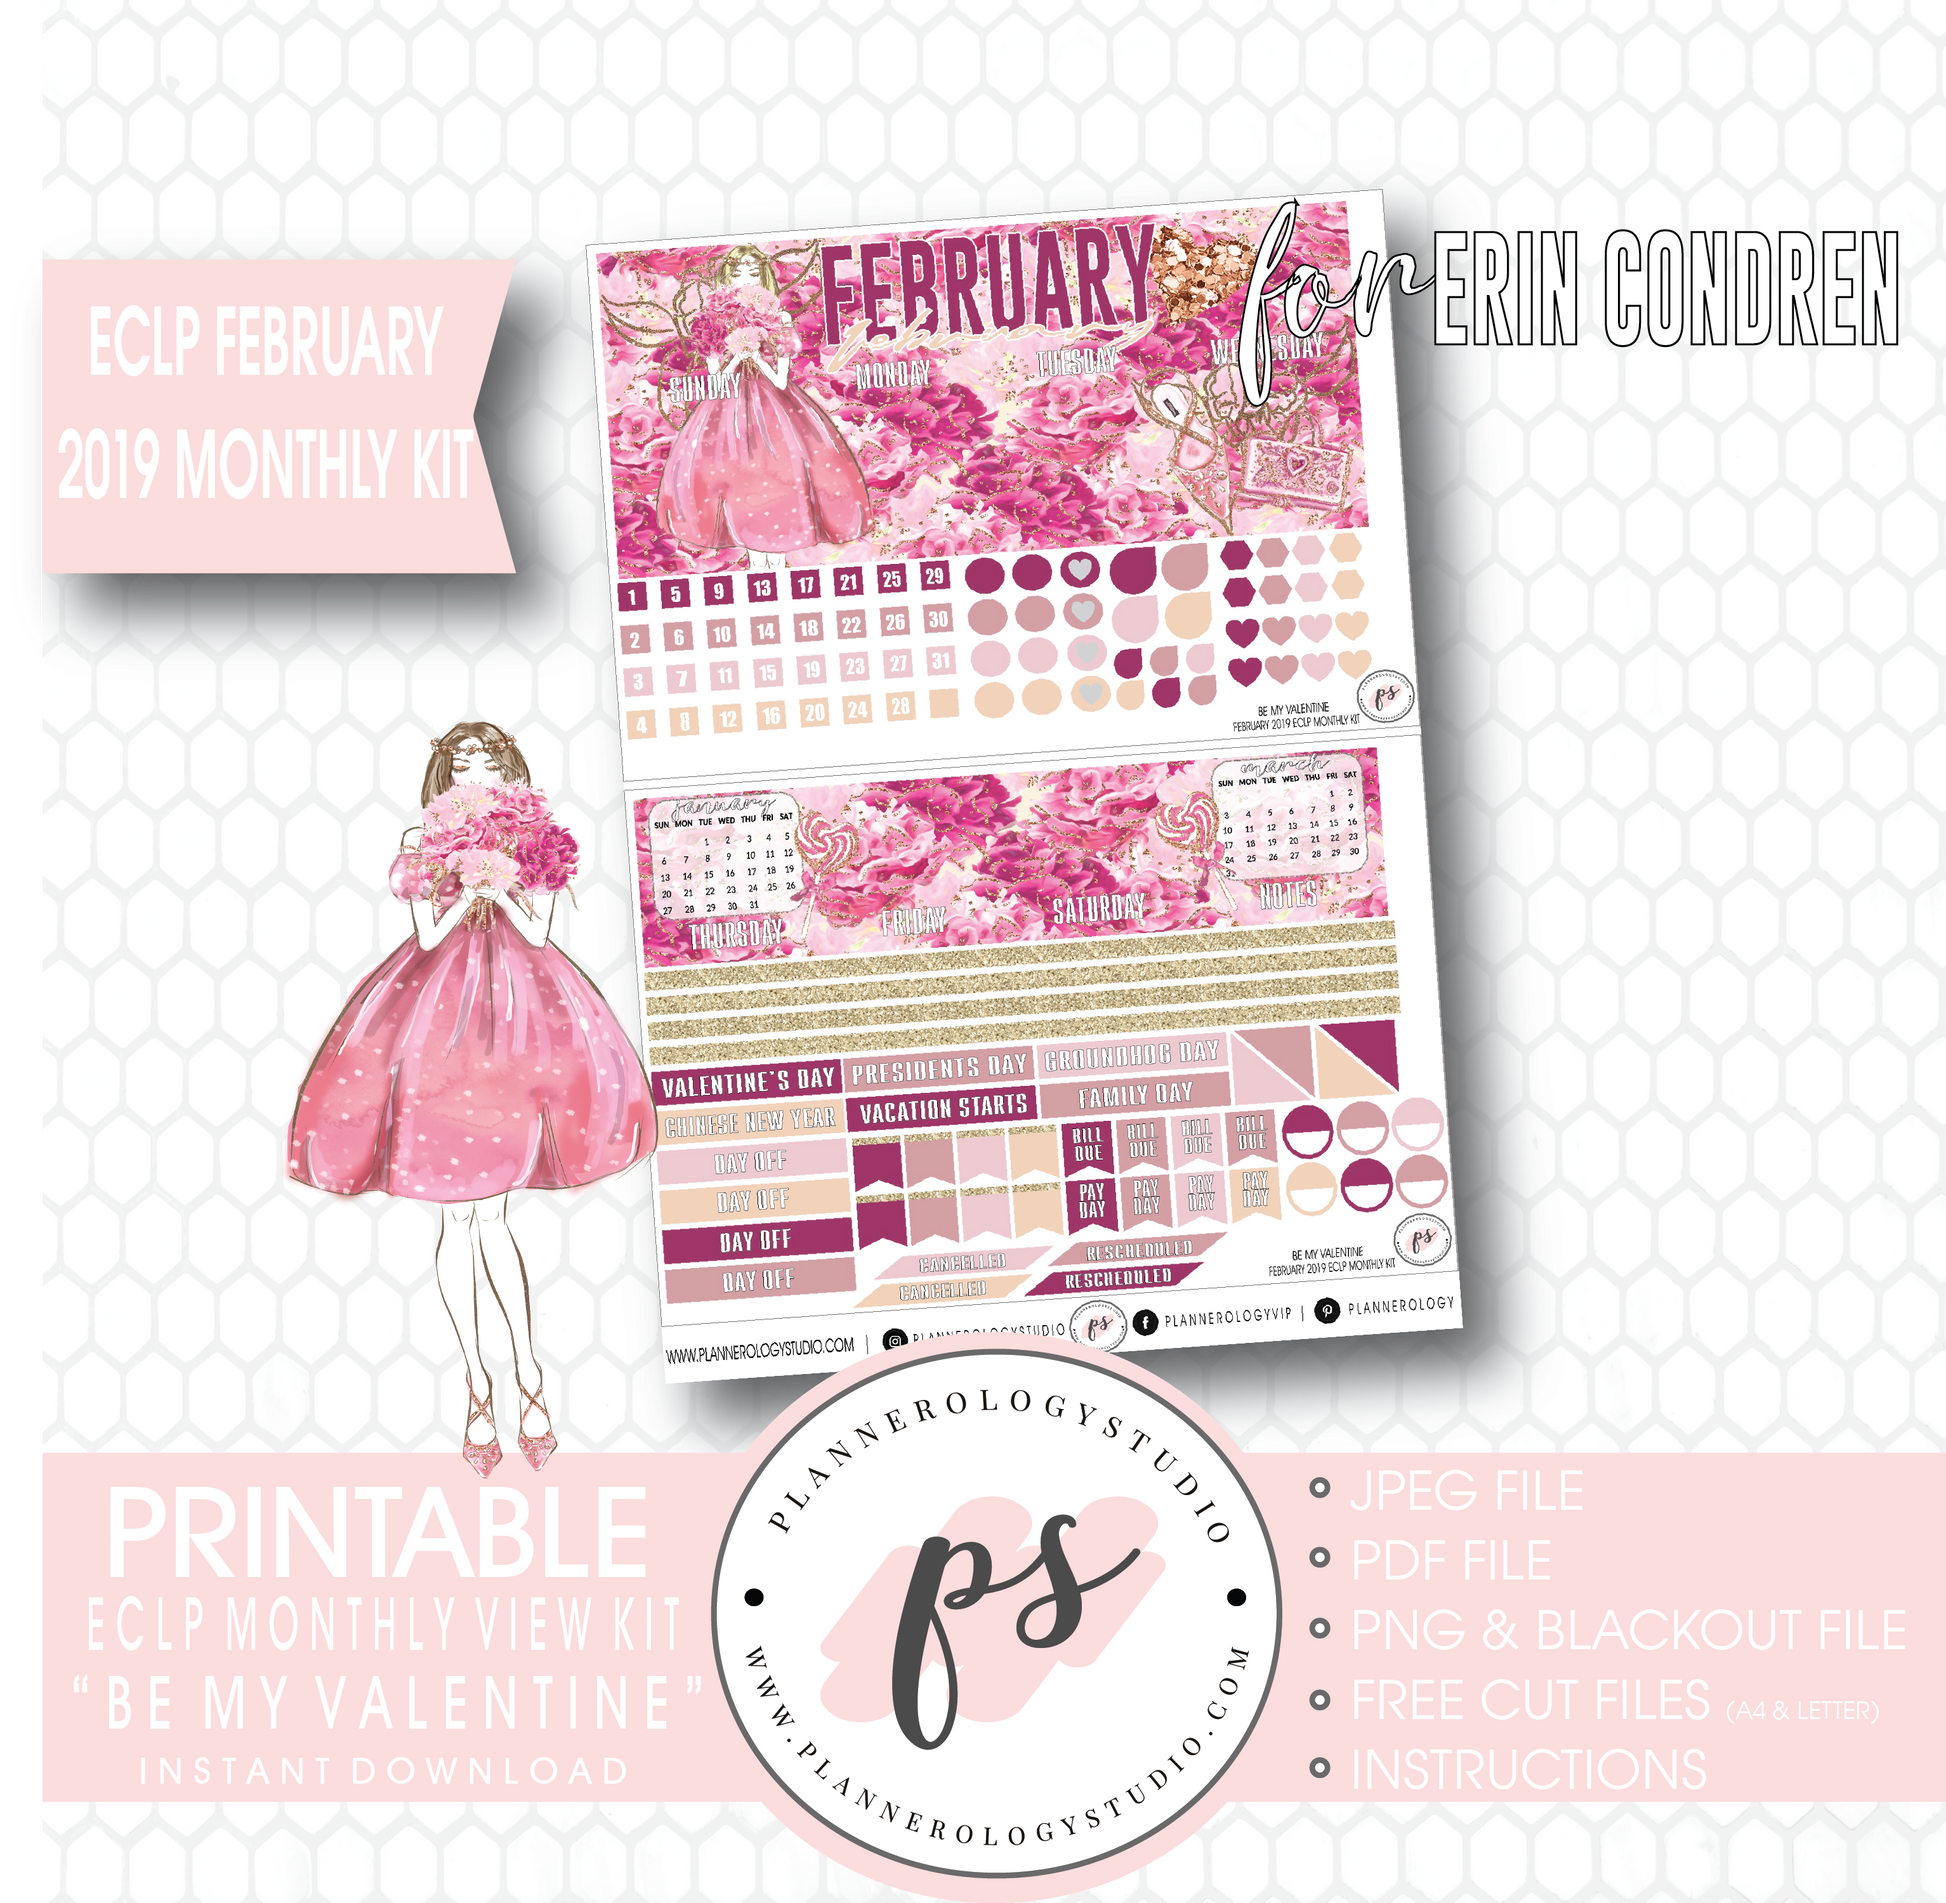 Be My Valentine February 2019 Monthly View Kit Digital Printable Planner Stickers (for use with Erin Condren) - Plannerologystudio